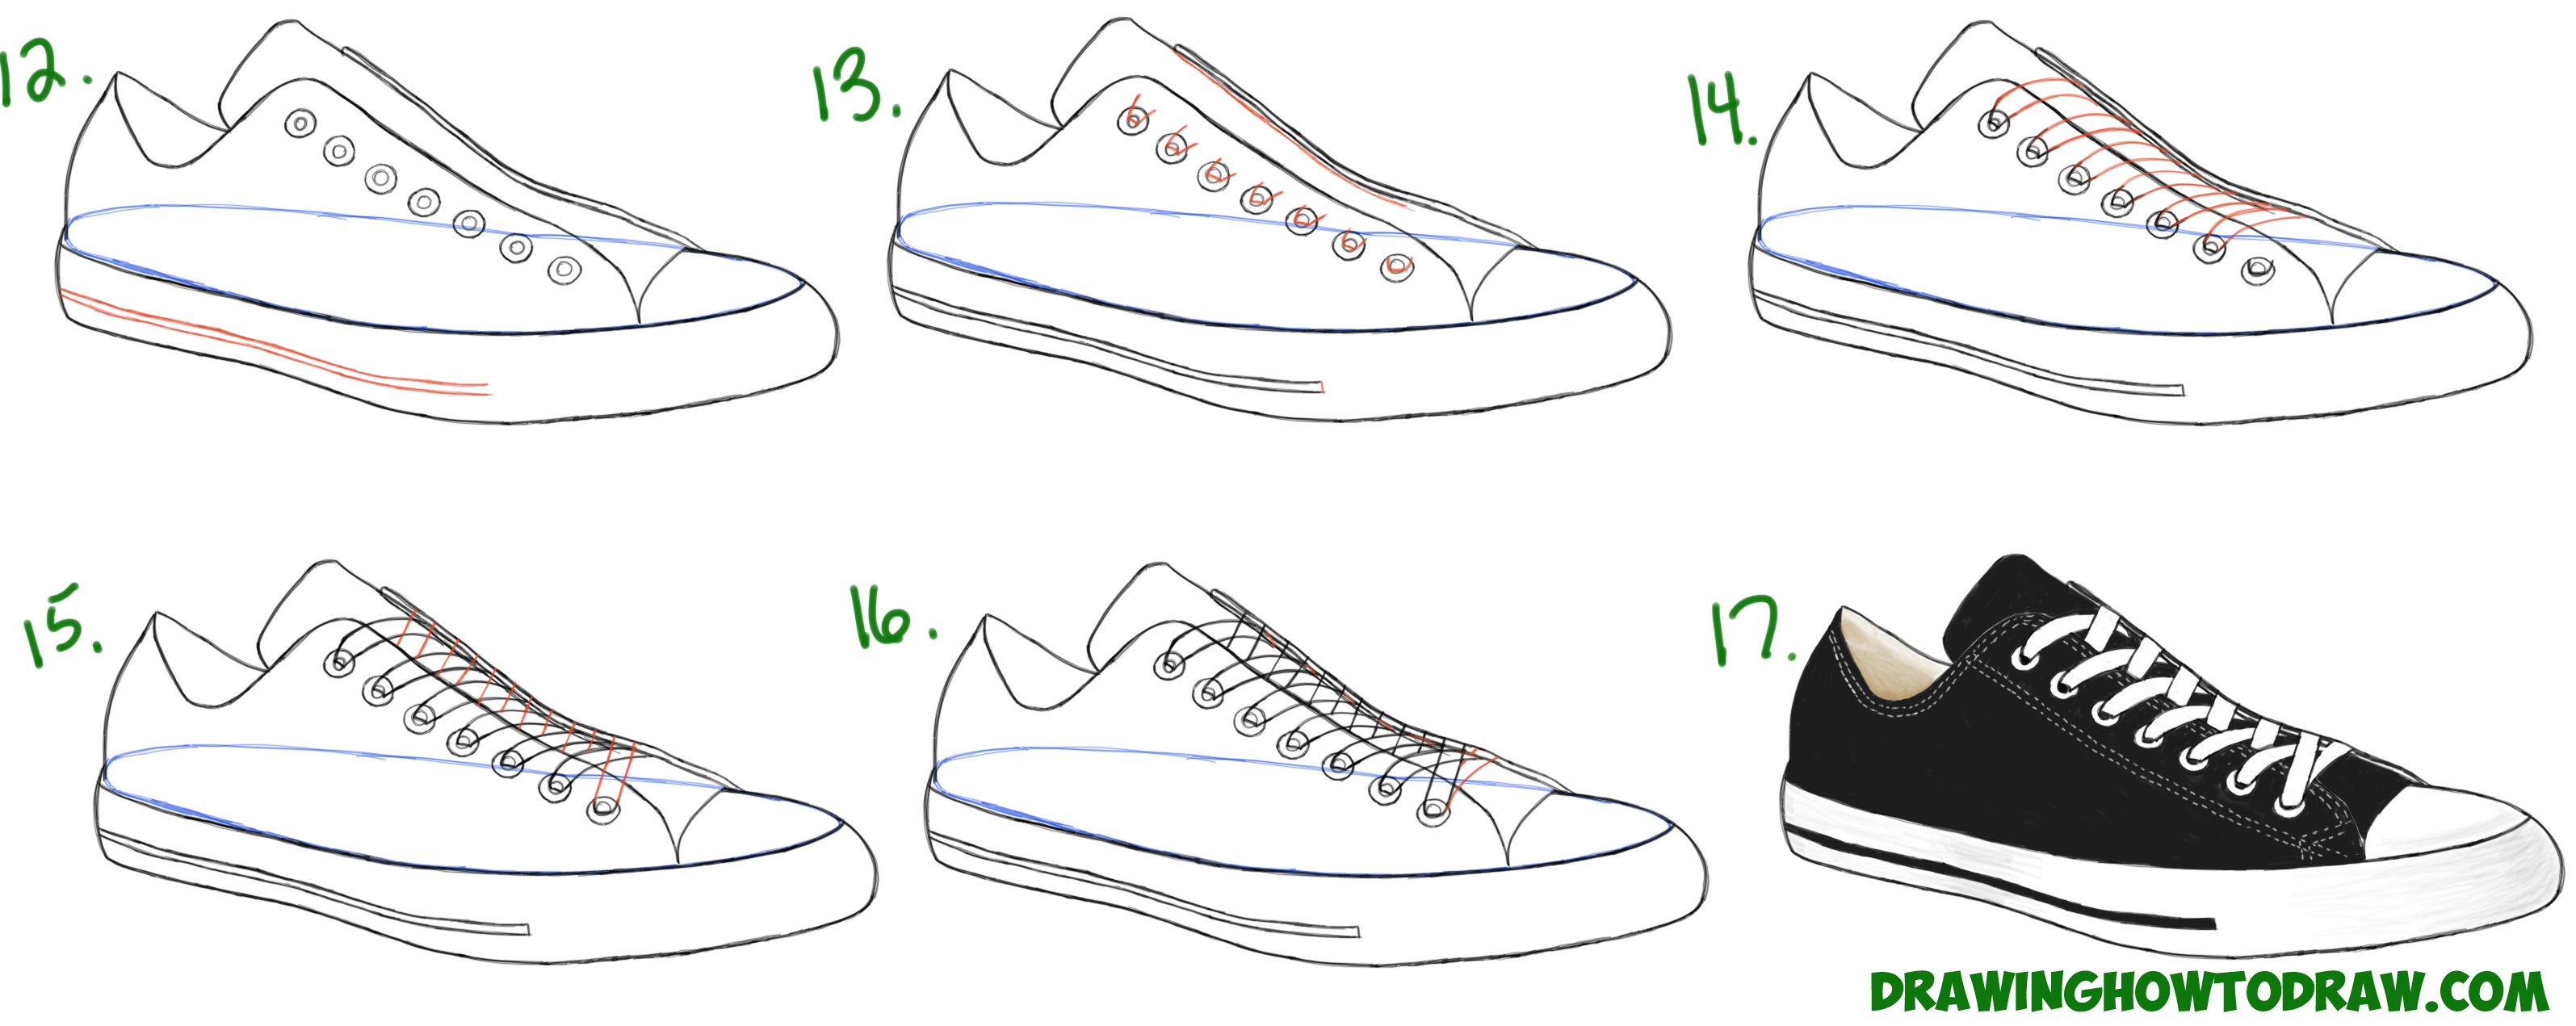 How to Draw Sneakers / Shoes with Easy Step by Step Drawing Tutorial